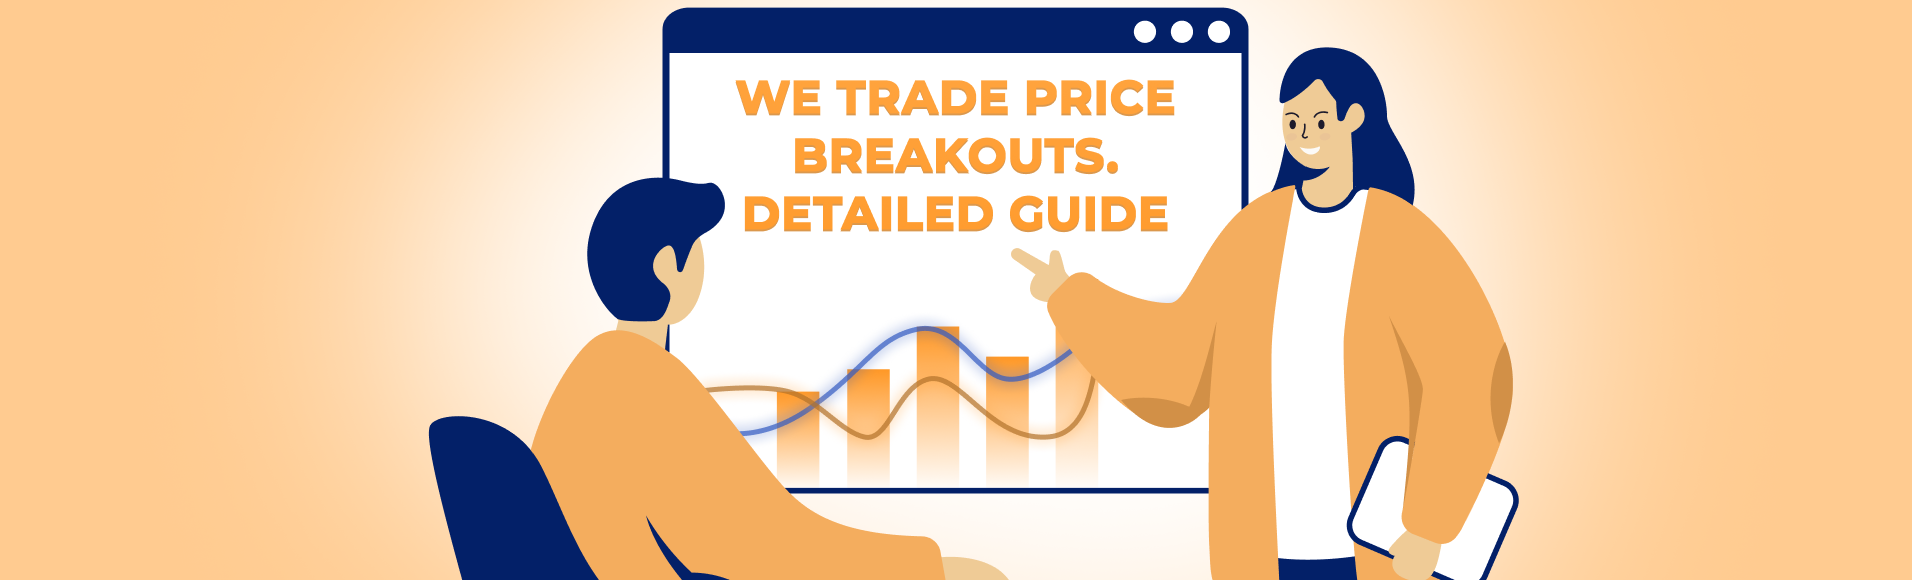 We trade price breakouts. Detailed Guide. 